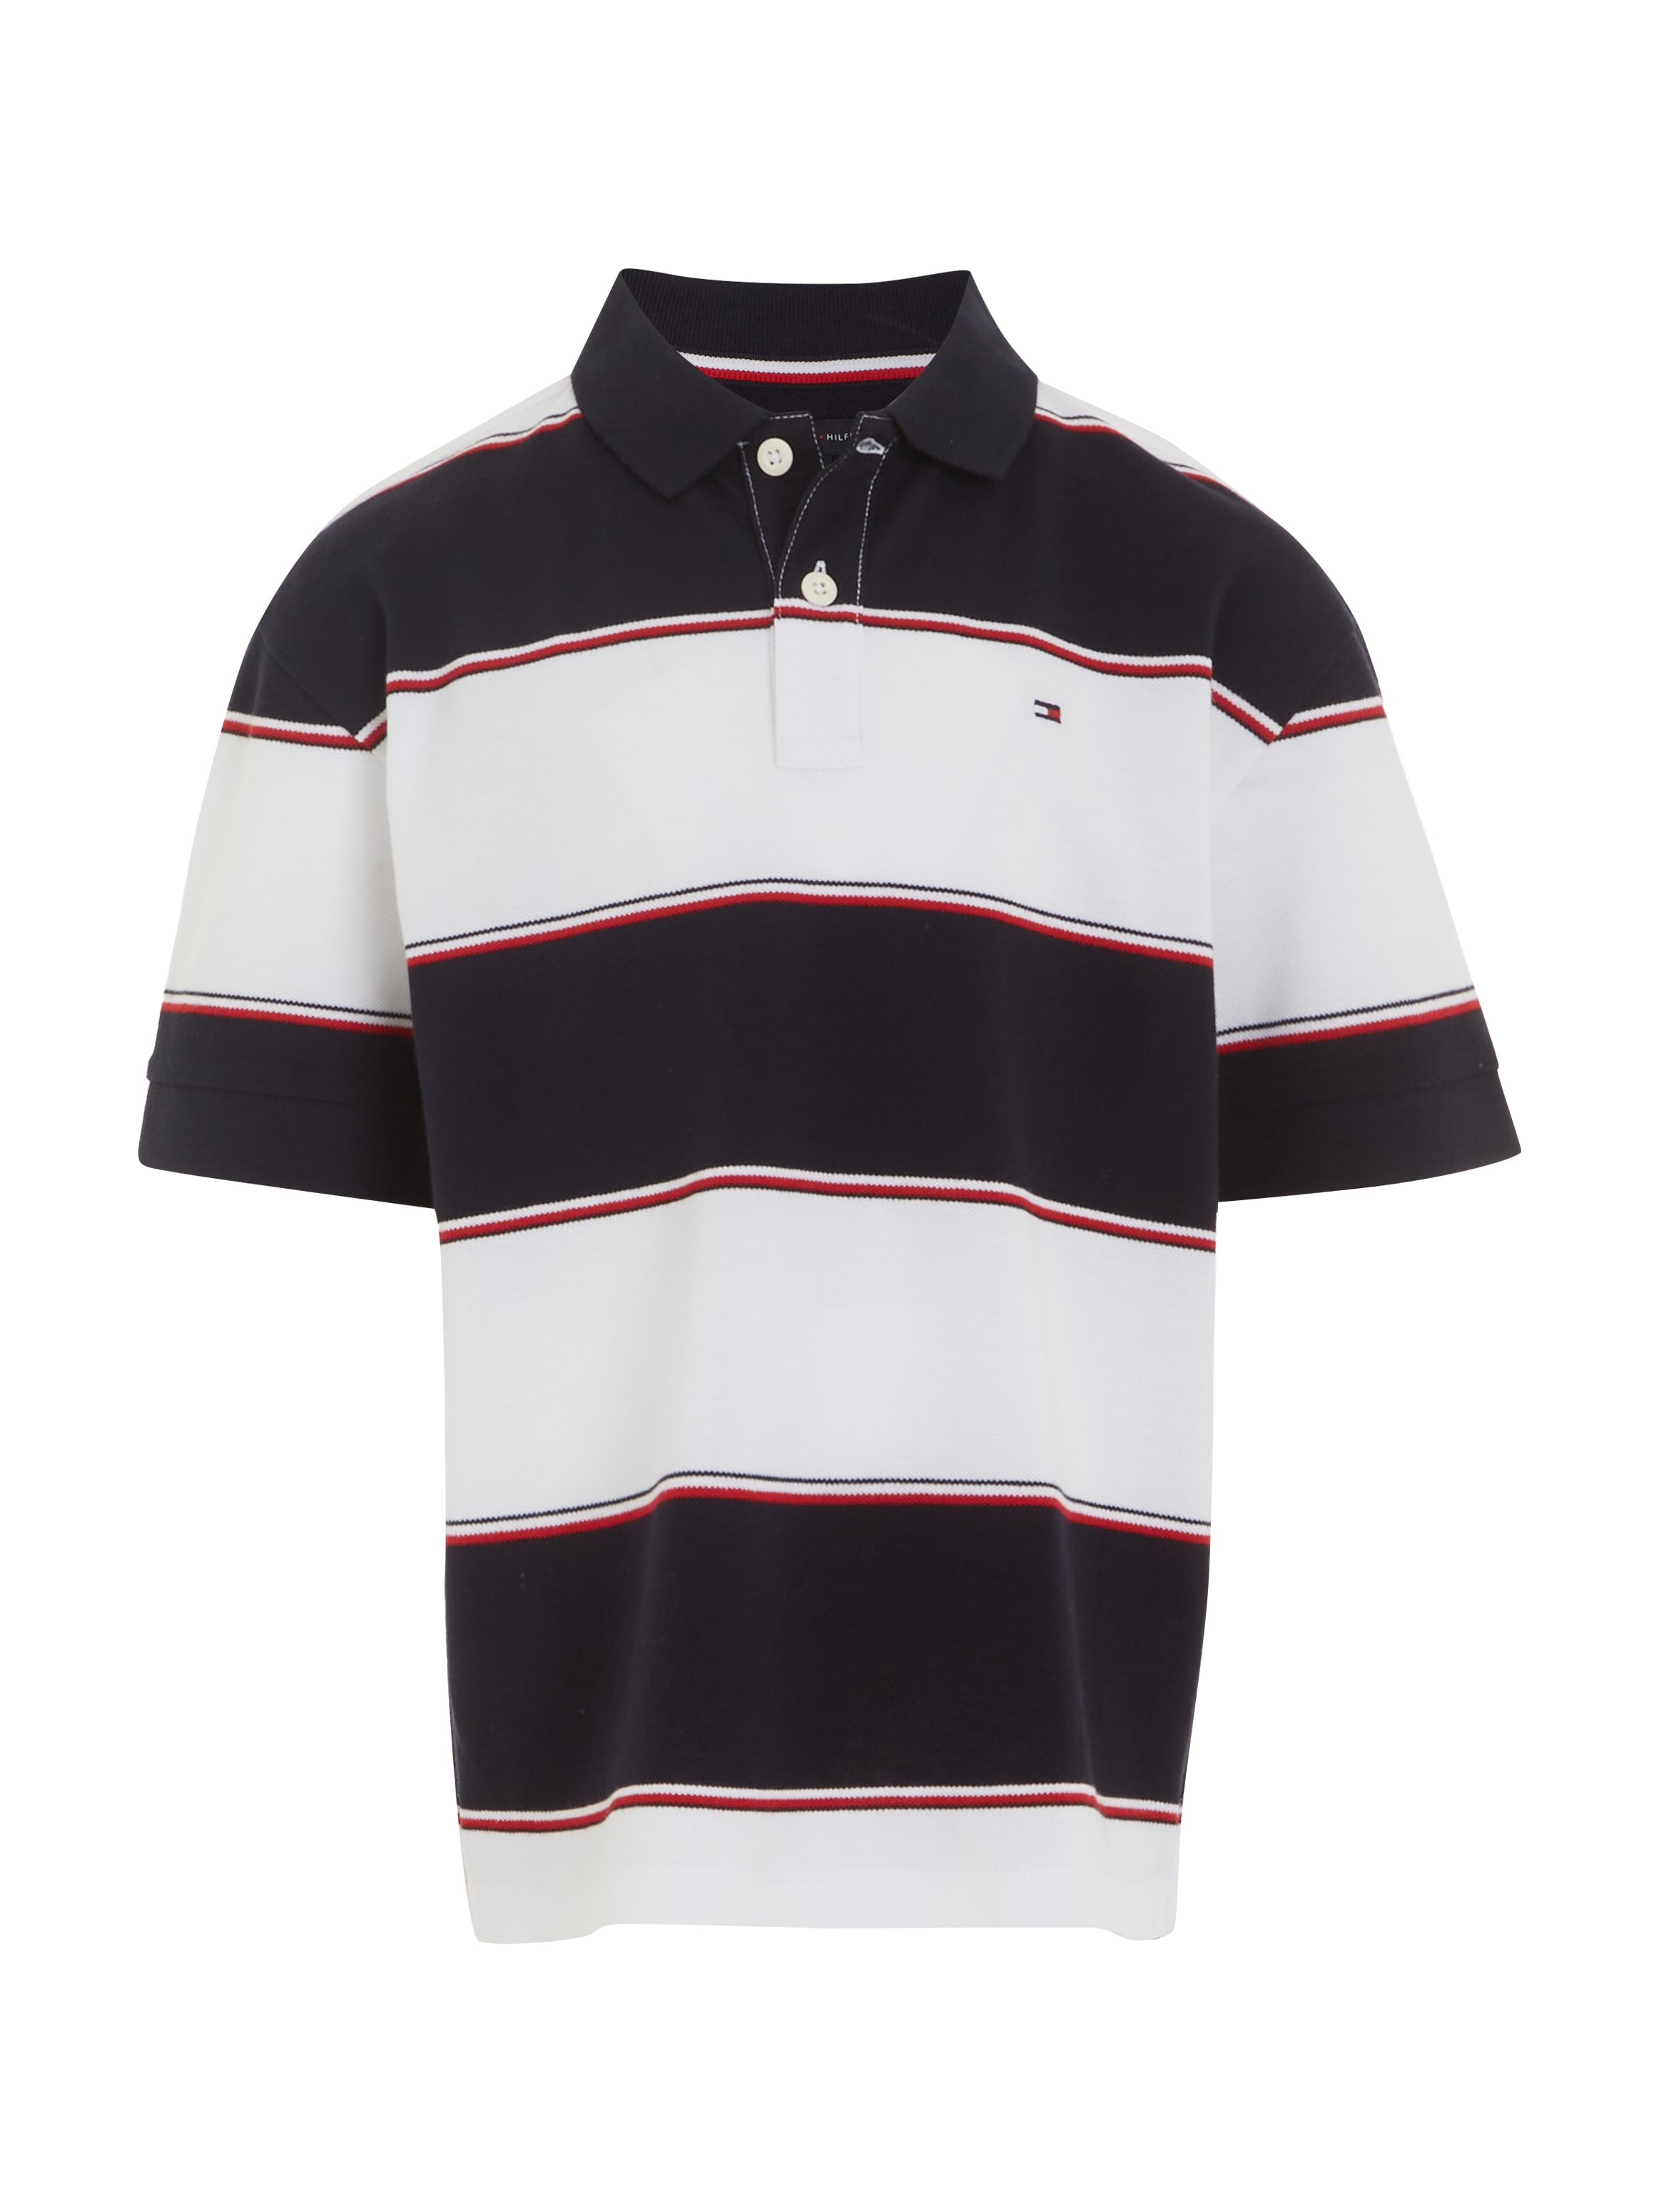 Tommy Hilfiger Poloshirt »GLOBAL RUGBY STRIPE POLO S/S«, Kinder bis 16 Jahre